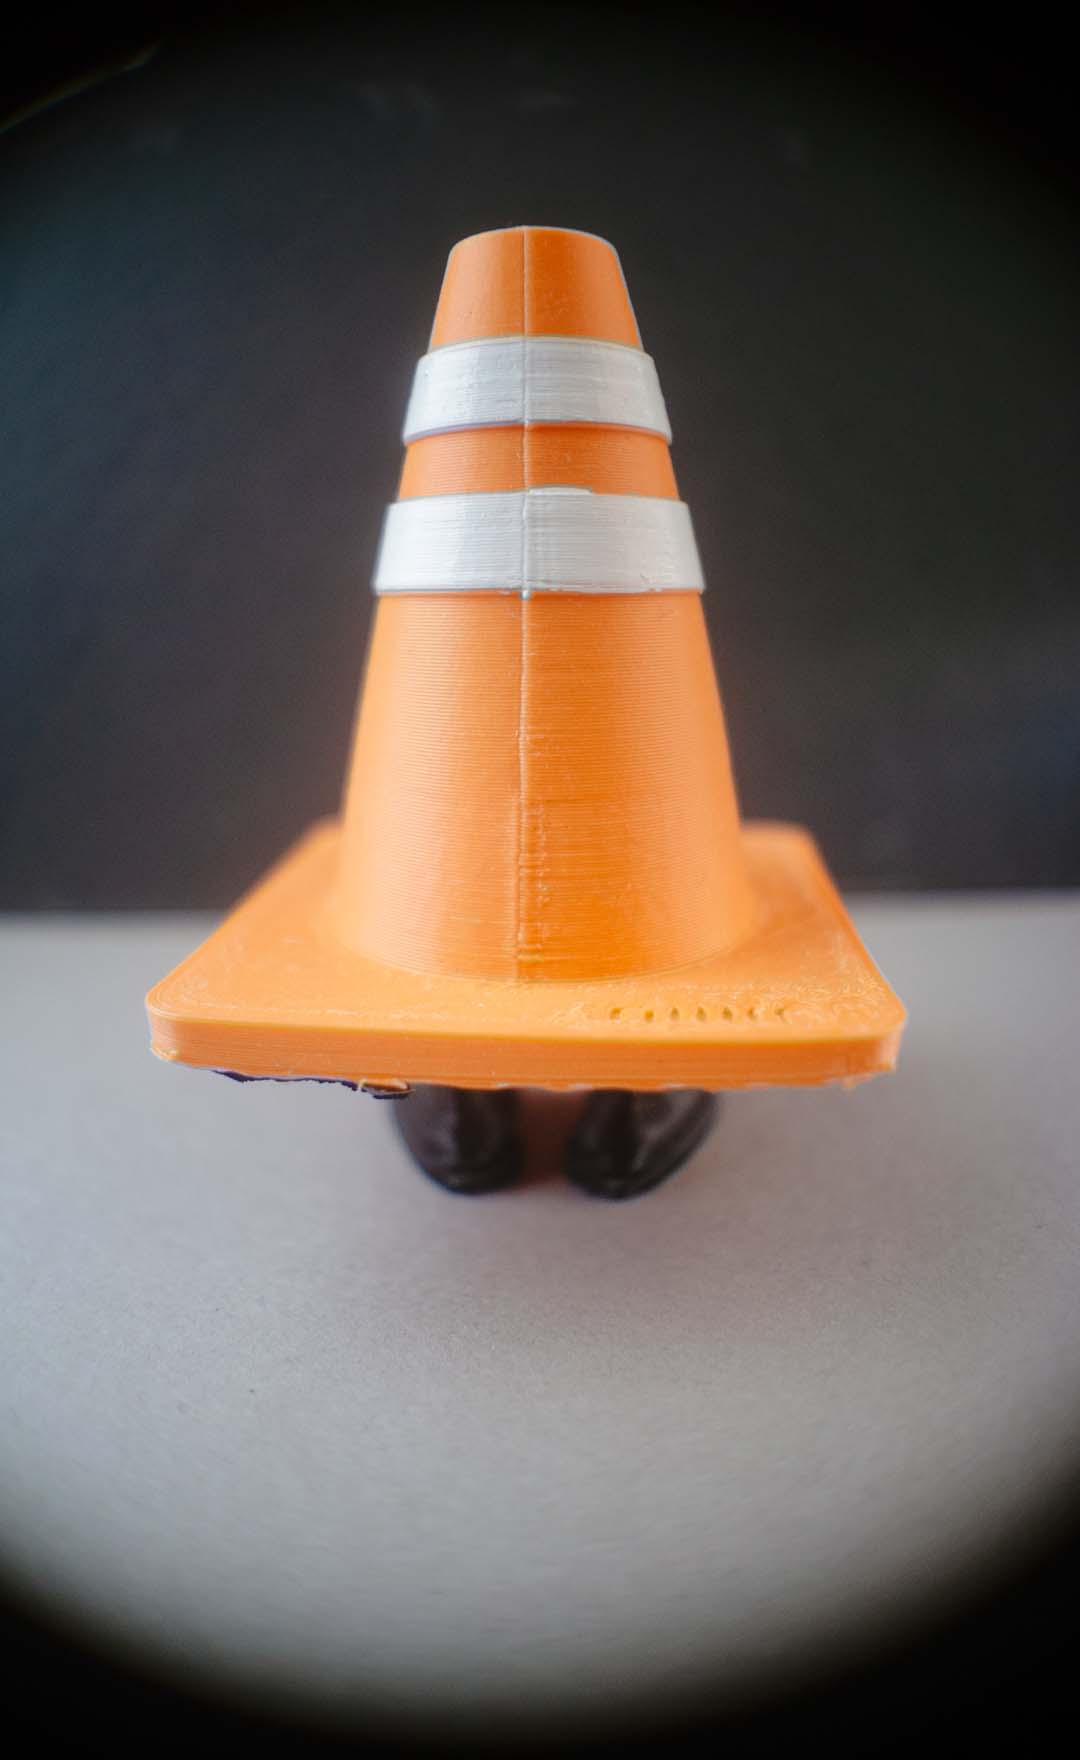 niiiice Guys Mini Figure: Coney I-Land - Detachable Legs, Traffic Cone Fingerboard Obstacle, and 3D printed Collectible for Your Epic Setup!